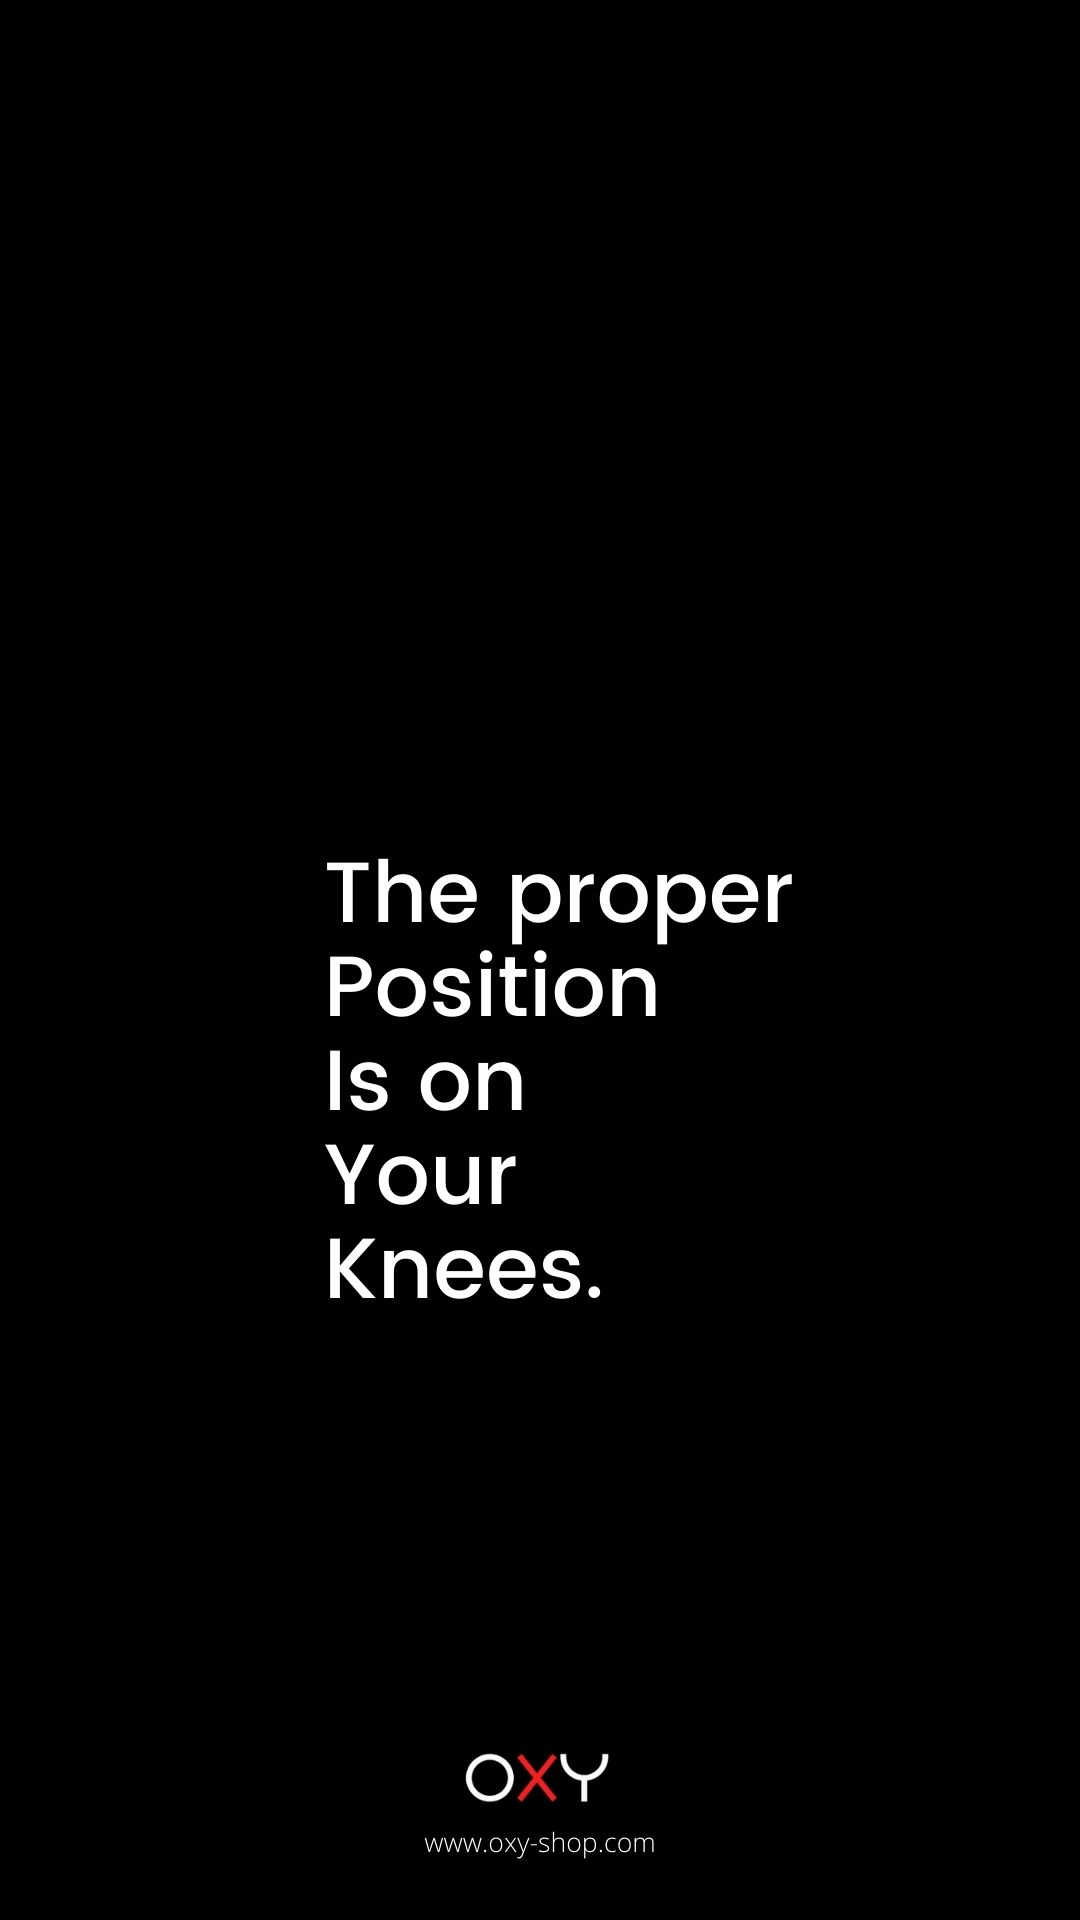 The proper position is on your knees. - BDSM wallpaper